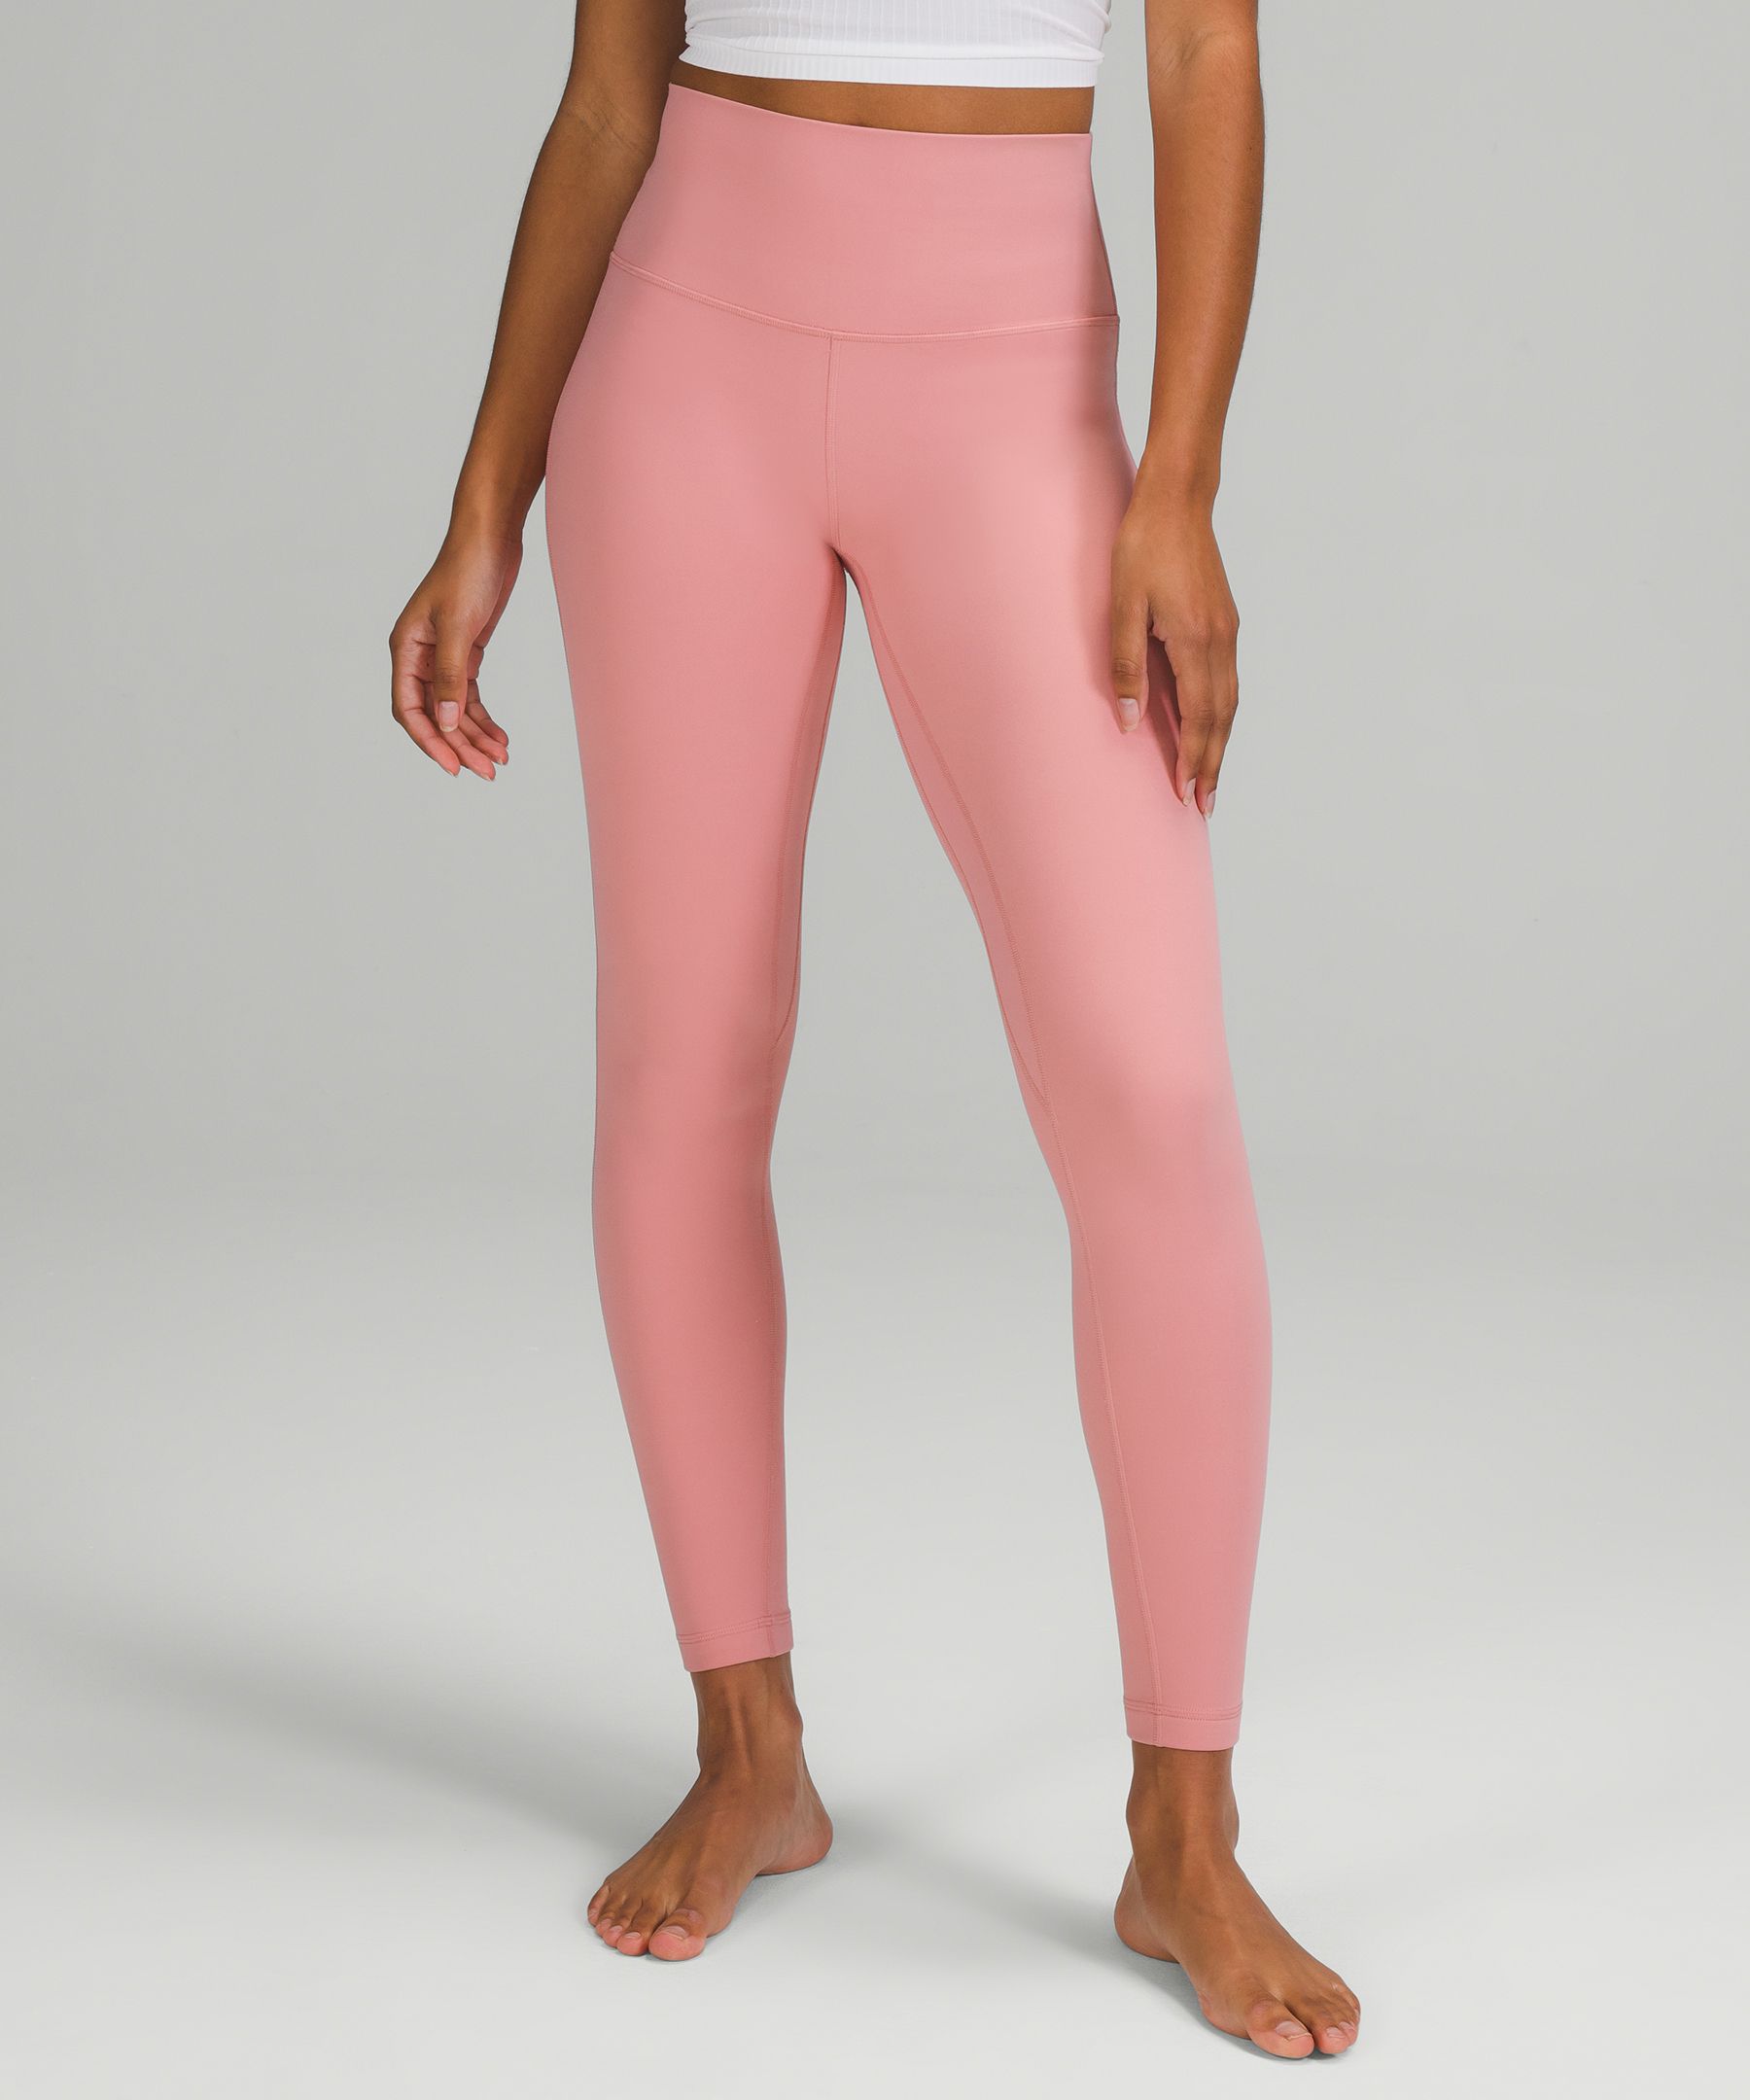 Lululemon Align™ High-rise Pants 28" In Pink Puff